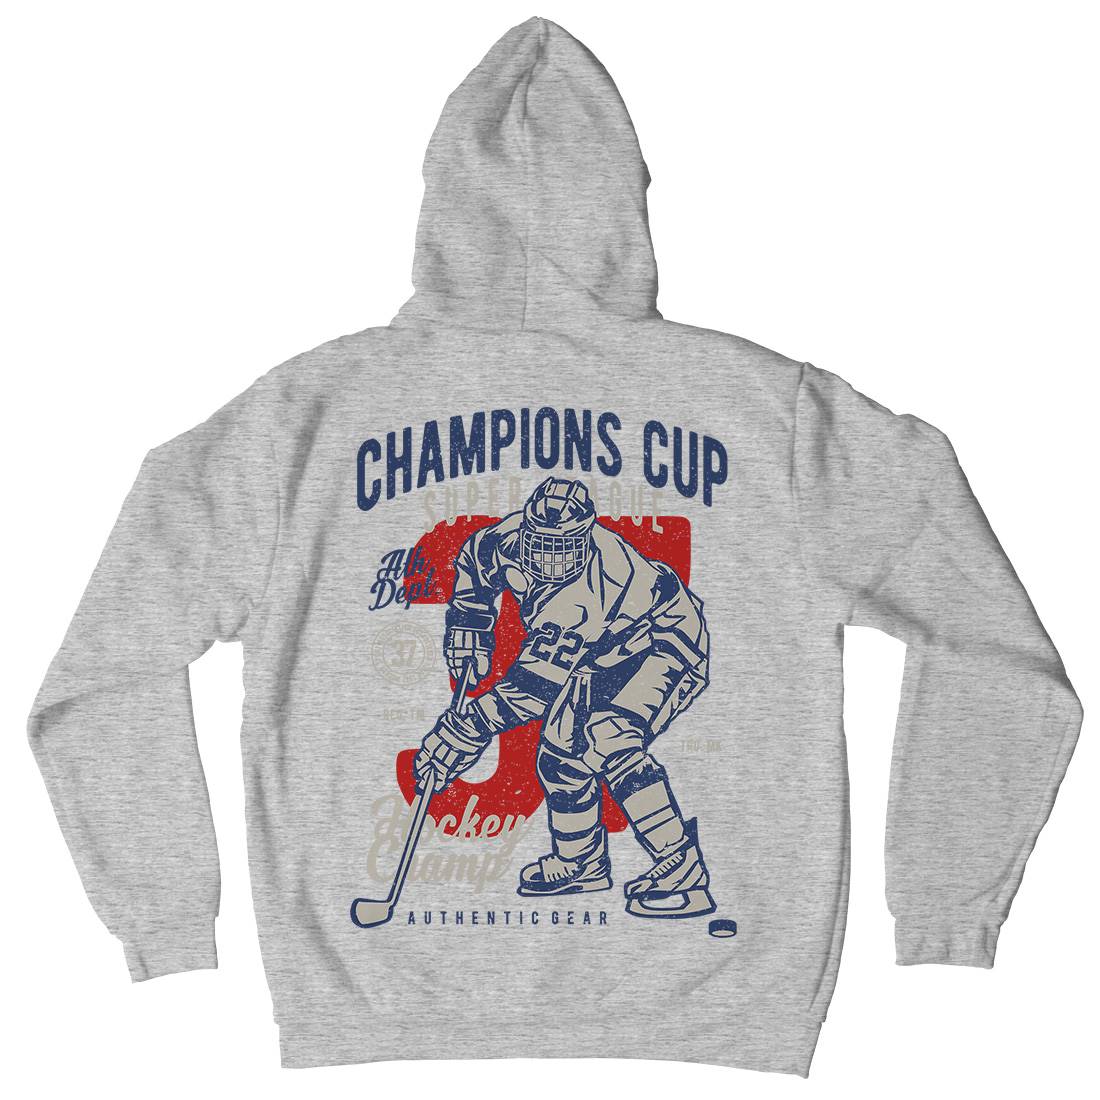 Champions Cup Hockey Kids Crew Neck Hoodie Sport A634